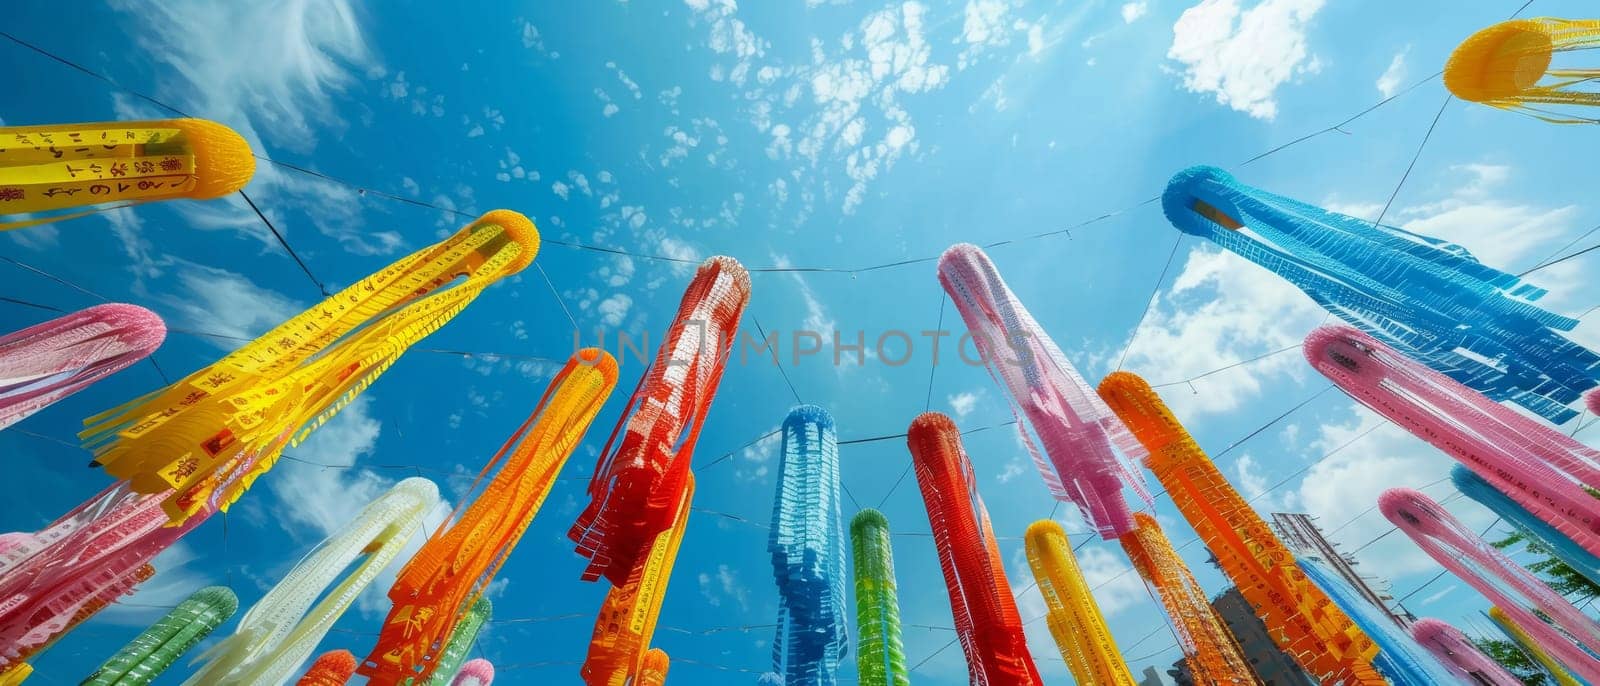 A striking view of Tanabata festival streamers flowing in the wind against a clear blue sky, symbolizing hopes and dreams during the festive season. by sfinks